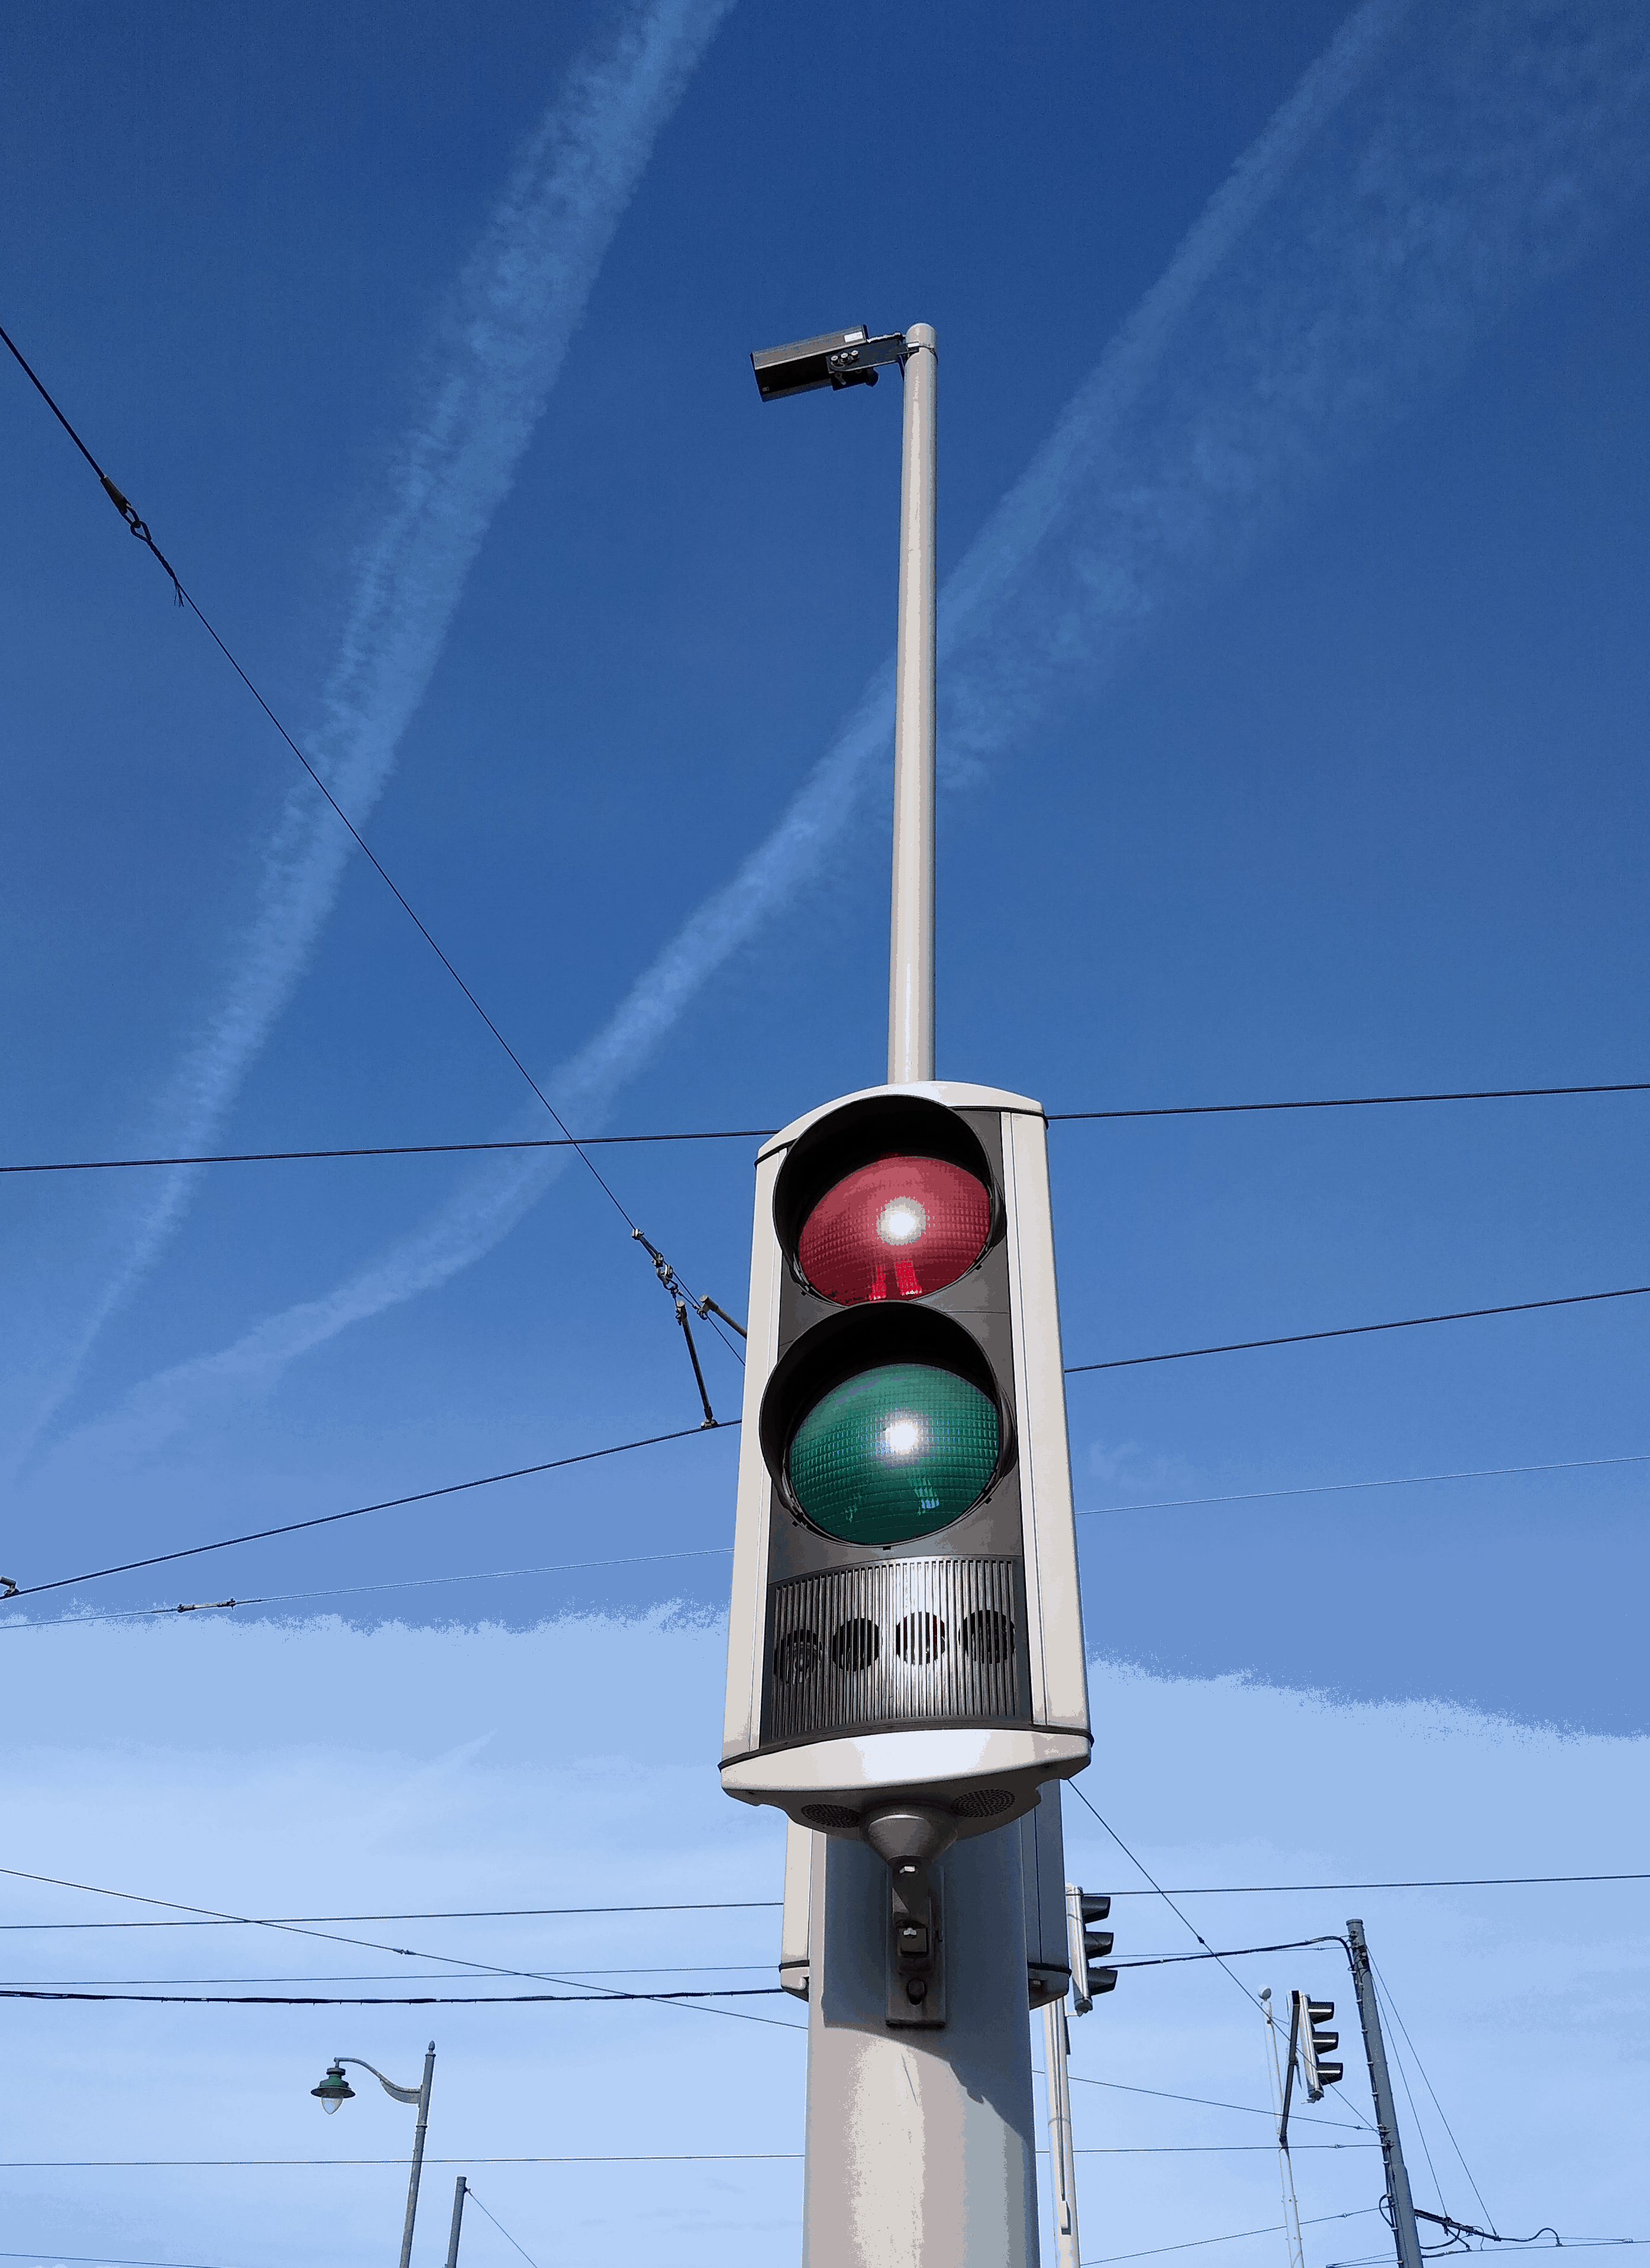 Two TMB-134 radars replace 10 inductive loops on Boulevard Léopold III in Brussels